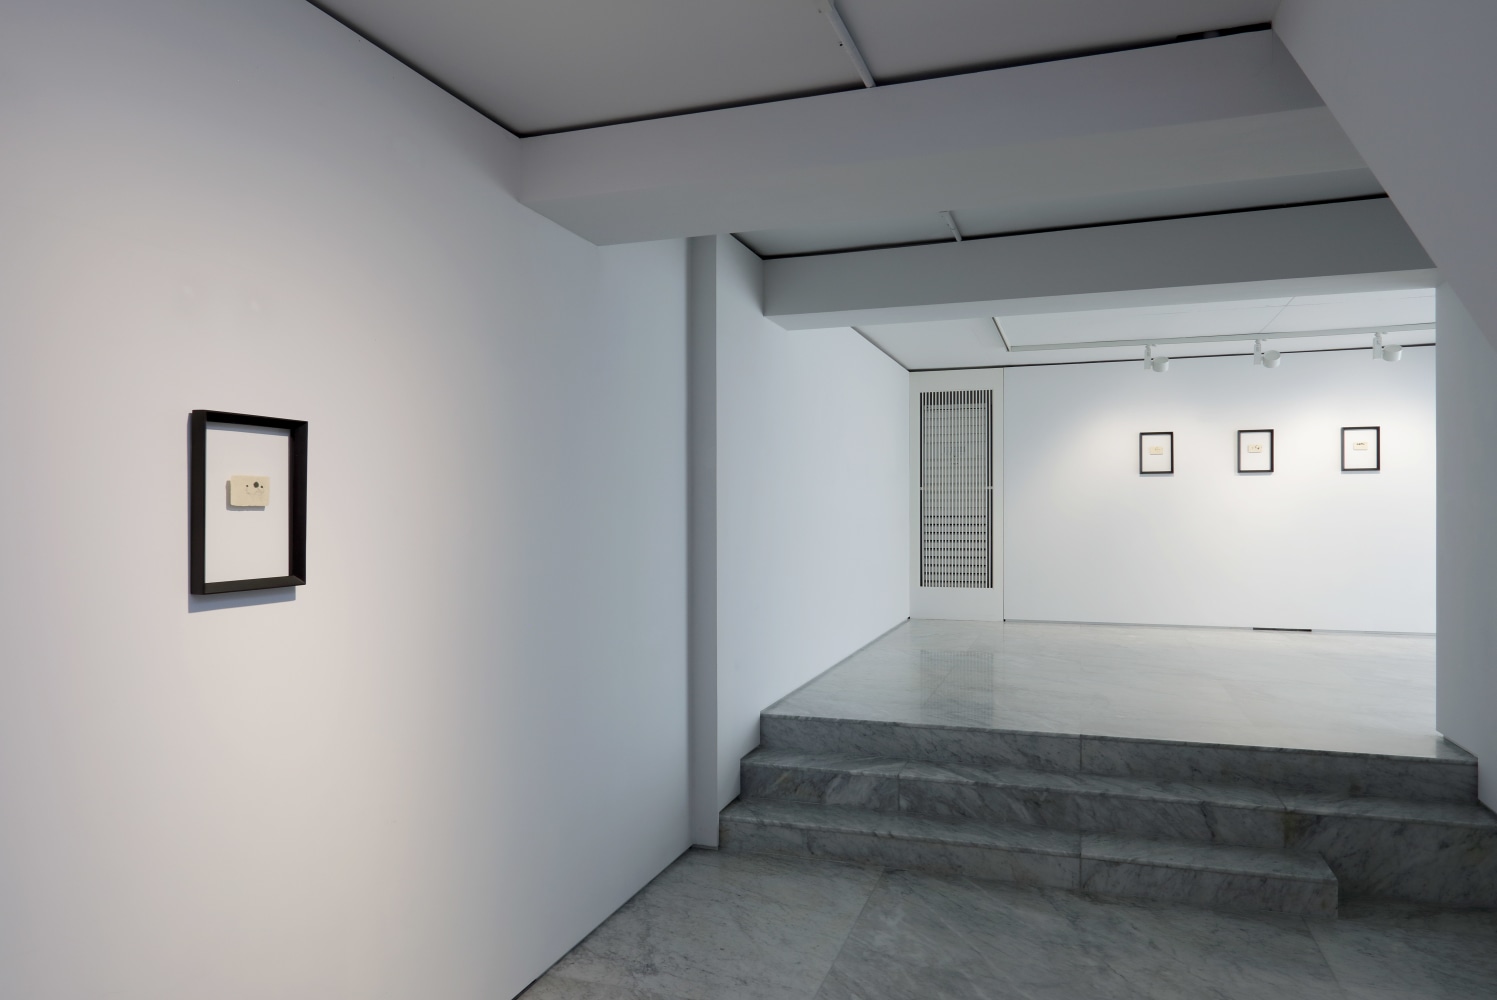 Installation view of&amp;nbsp;Koo Jeong A:2O2O at PKM+, Seoul, 2020

Courtesy of the artist &amp;amp; PKM Gallery